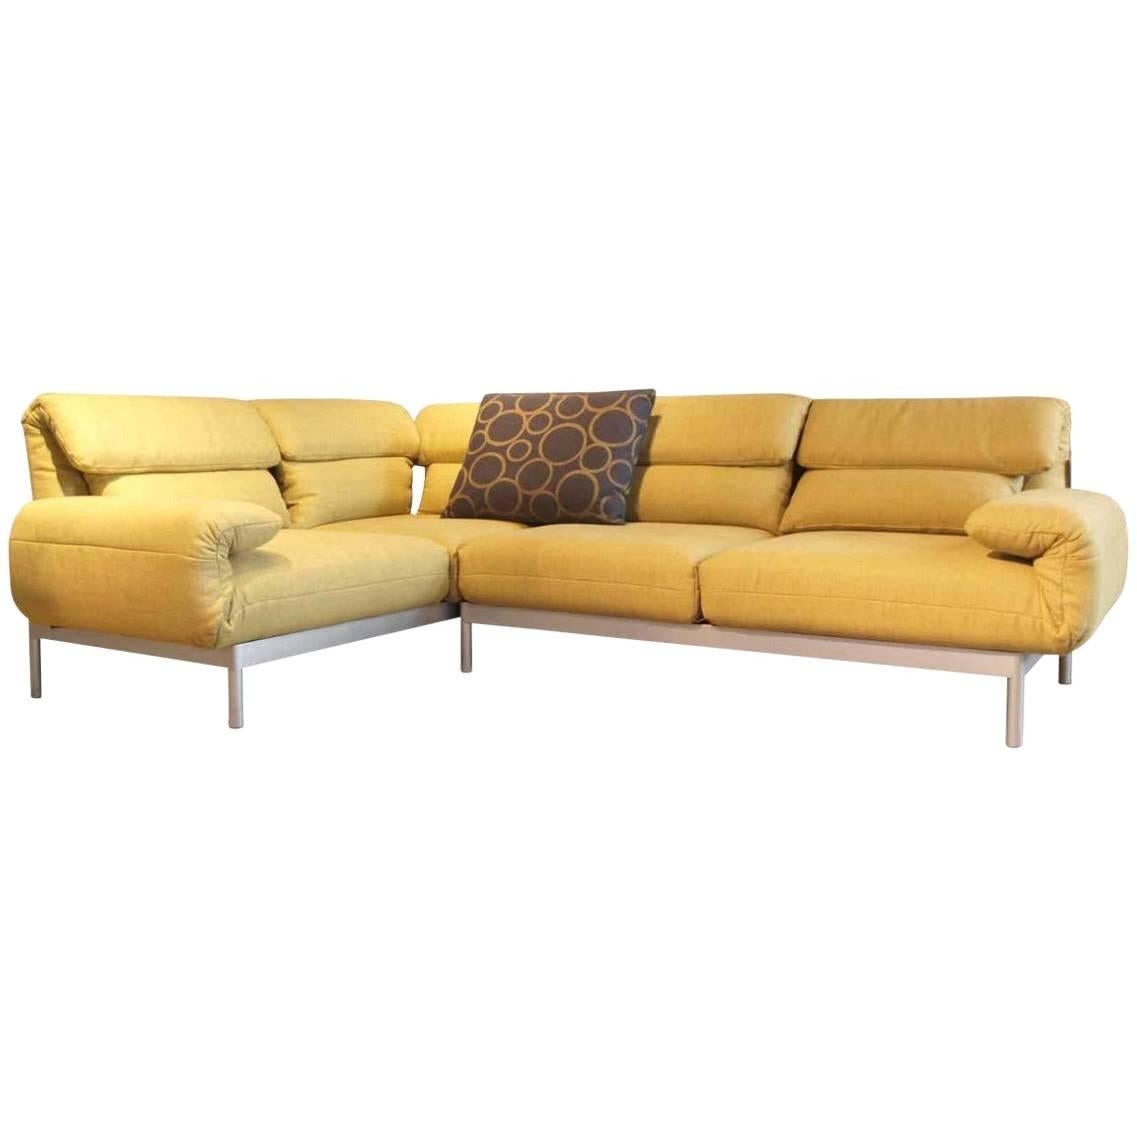 Sofa "Plura" by Manufacturer Rolf Benz in Metal Finished in Fabric